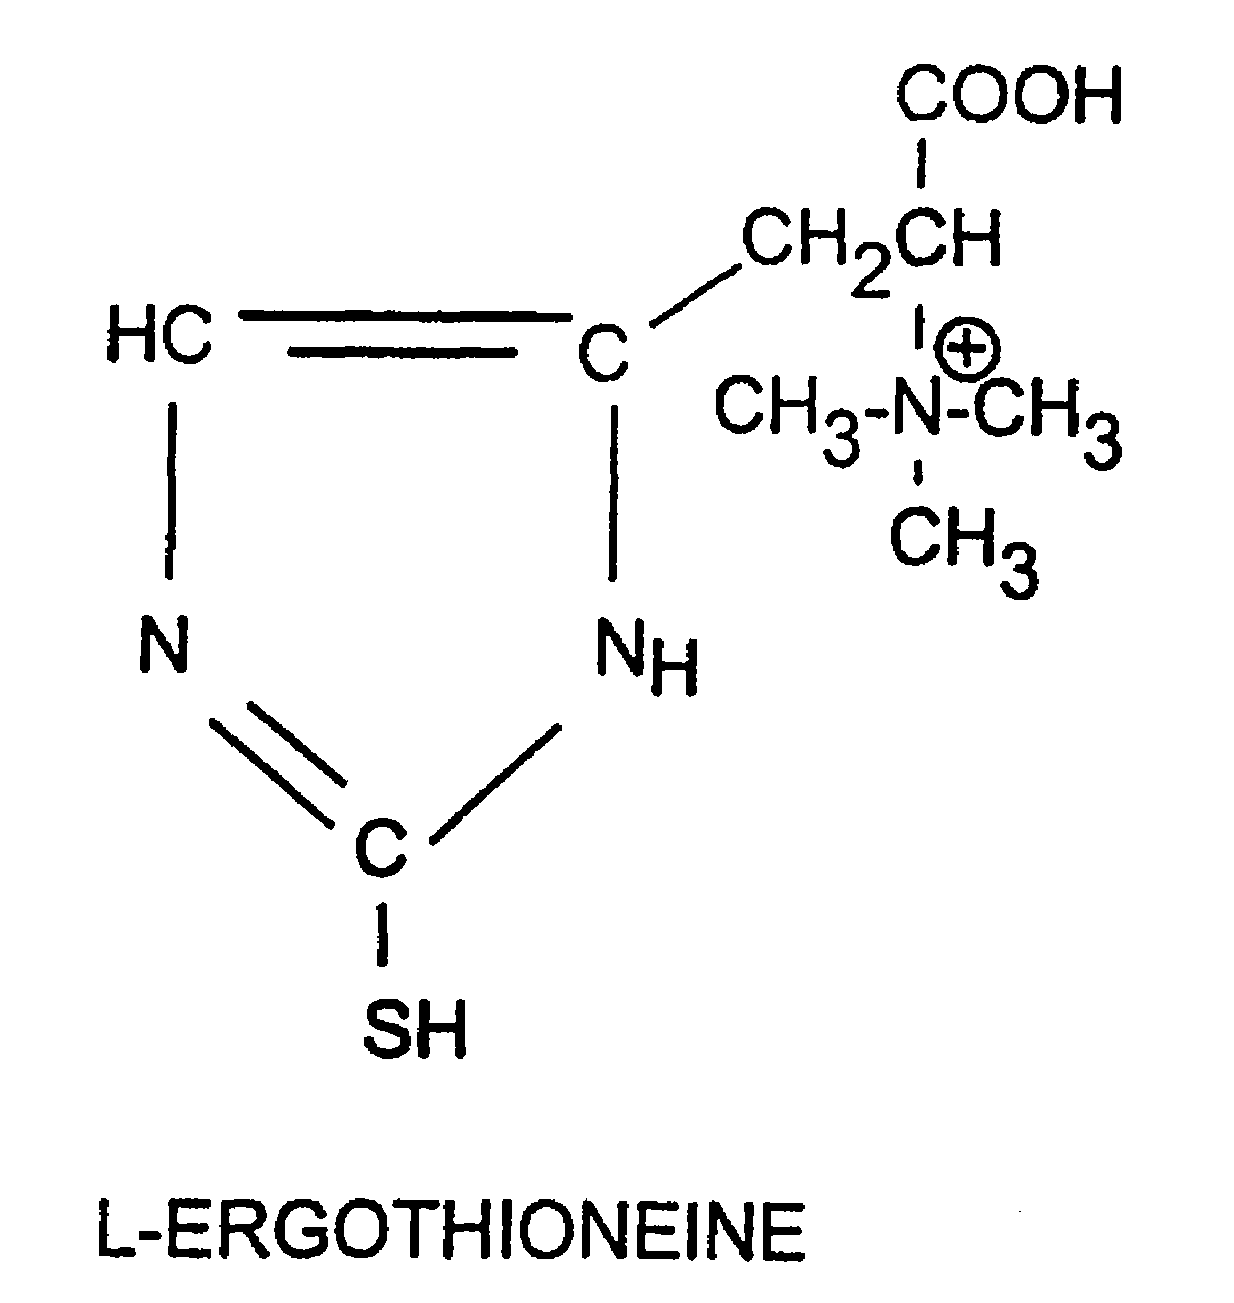 Use of ergothioneine as a preservative in foods and beverages